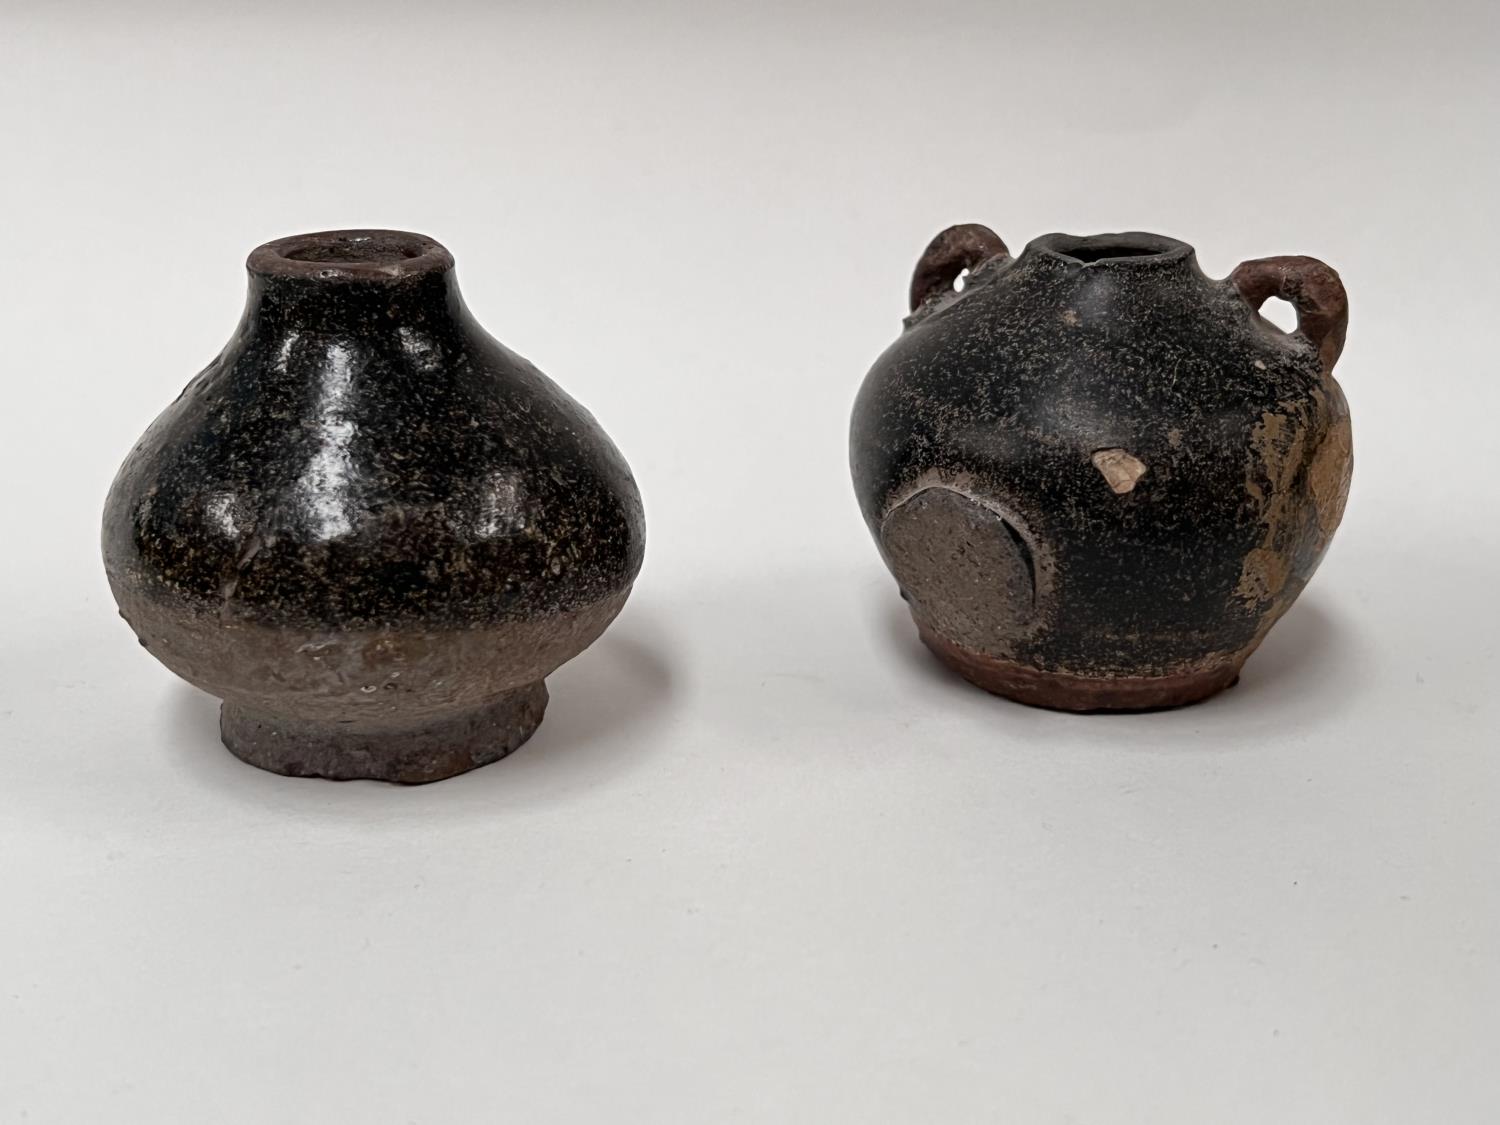 A Chinese small ceramic whistle; 2 Cambodian small vases with dark mottled glaze, possibly Khmer, - Image 2 of 3